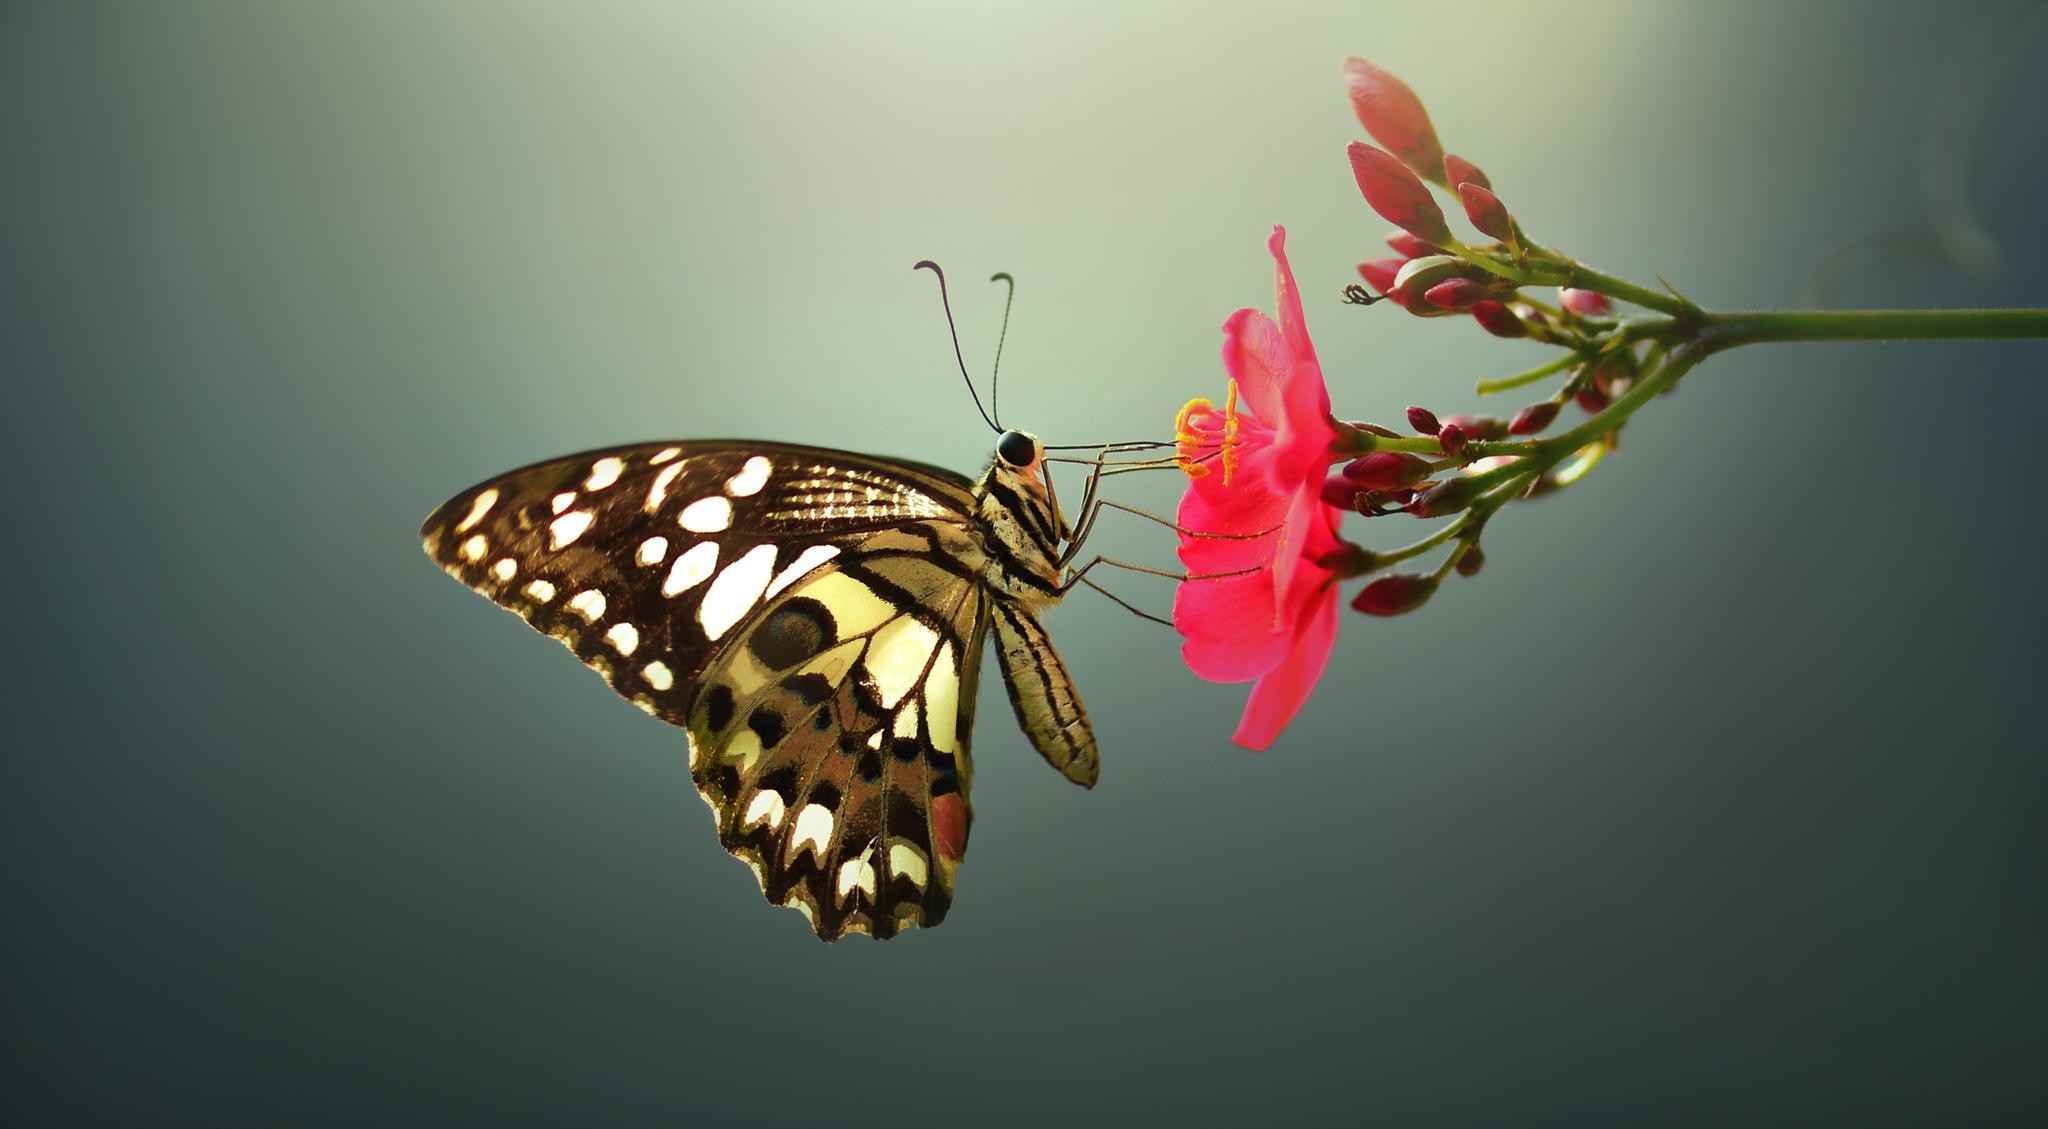 General 2048x1129 lepidoptera macro flowers butterfly insect animals simple background plants